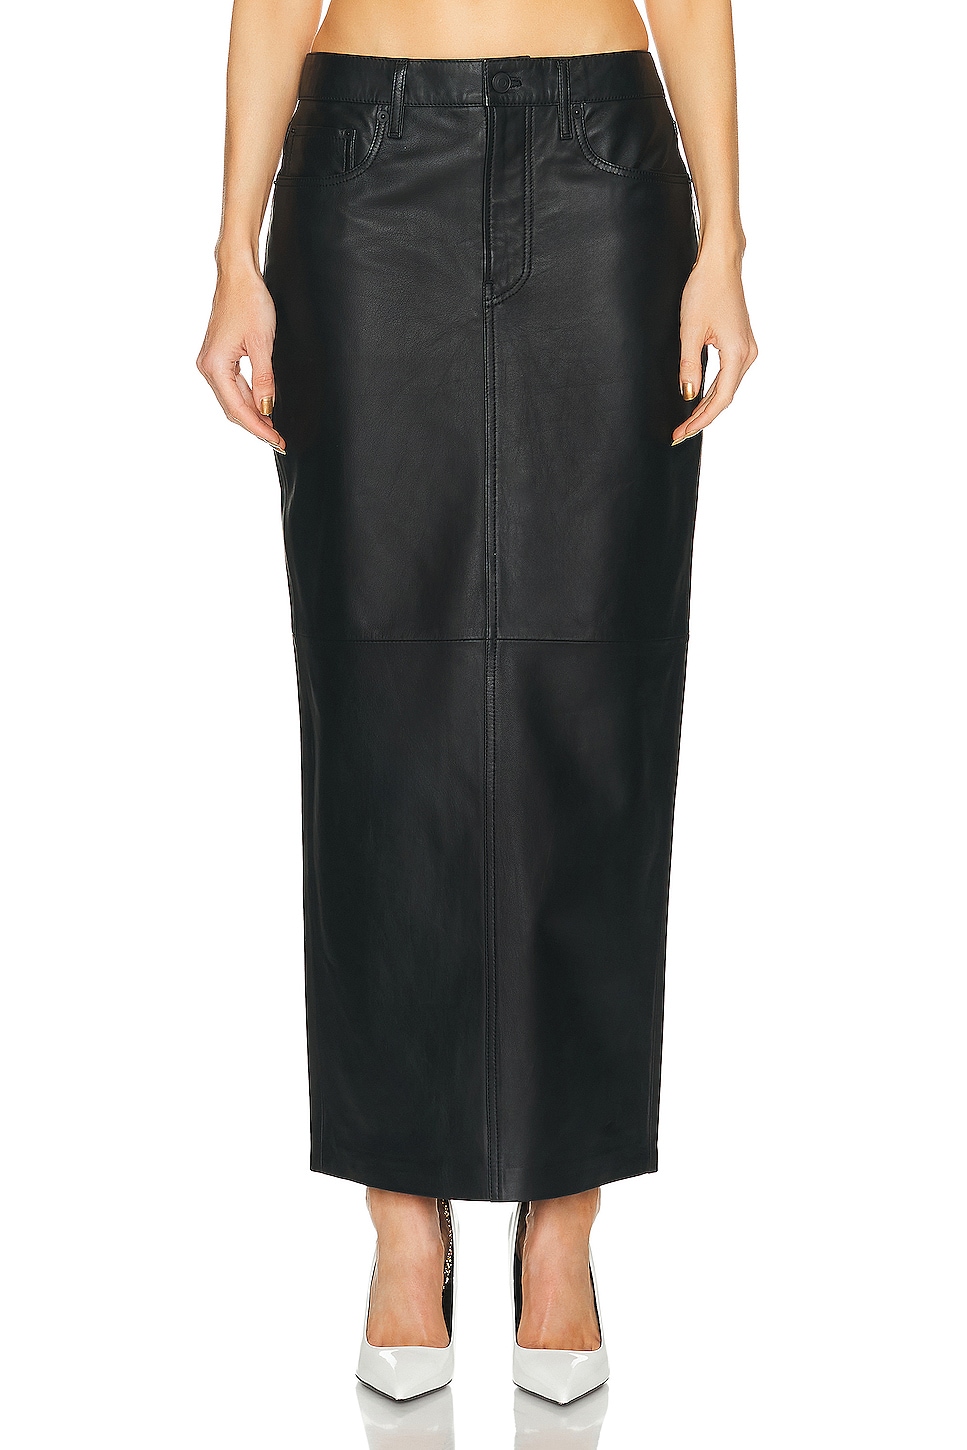 Image 1 of WARDROBE.NYC Leather Column Skirt in Black